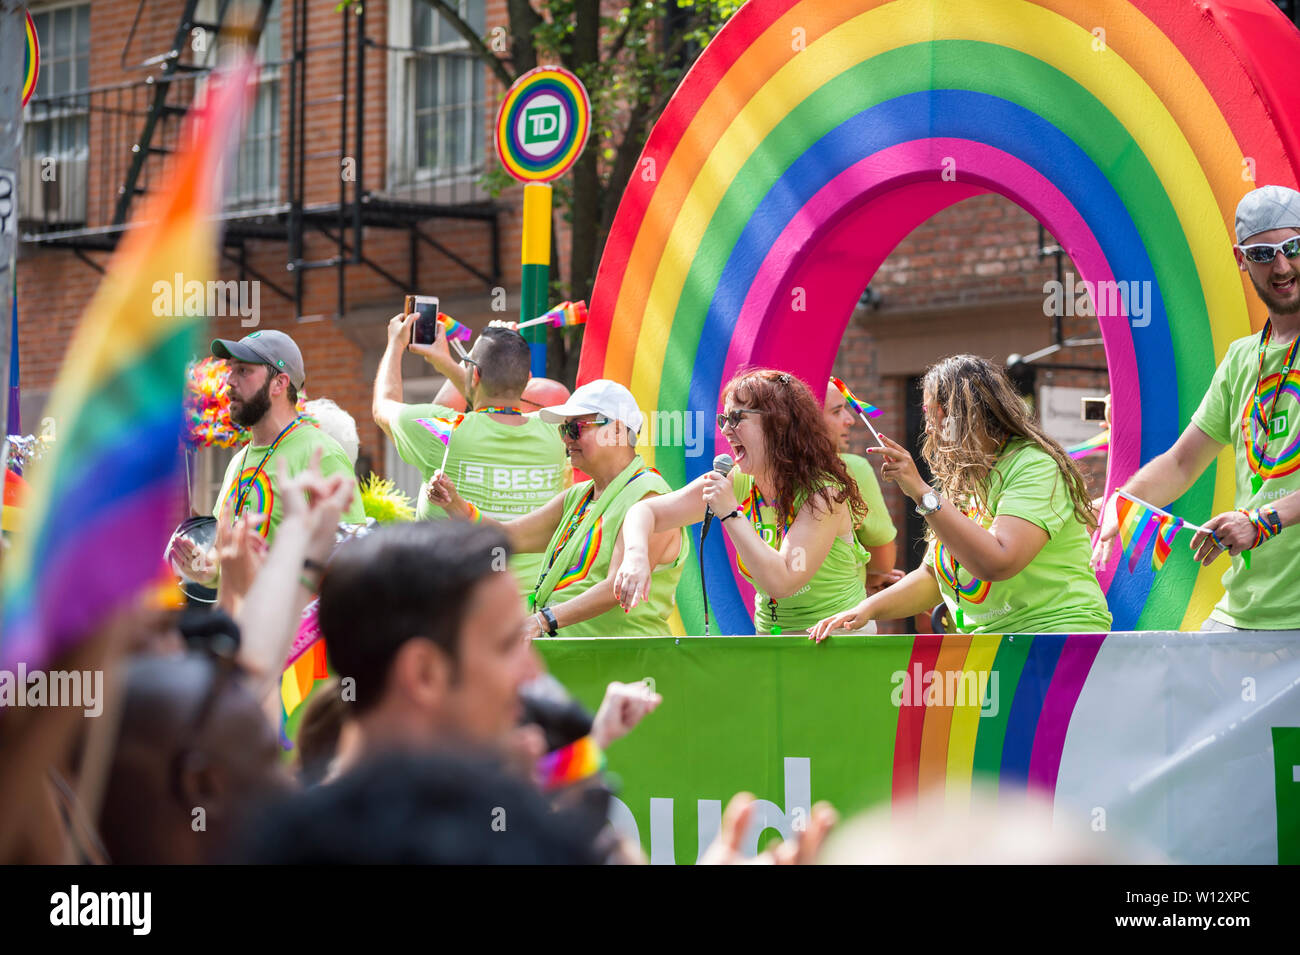 NEW YORK CITY - JUNE 25, 2017: Participants wave flags on a float with a rainbow arch sponsored by TD Bank in the annual Pride Parade in the Village. Stock Photo